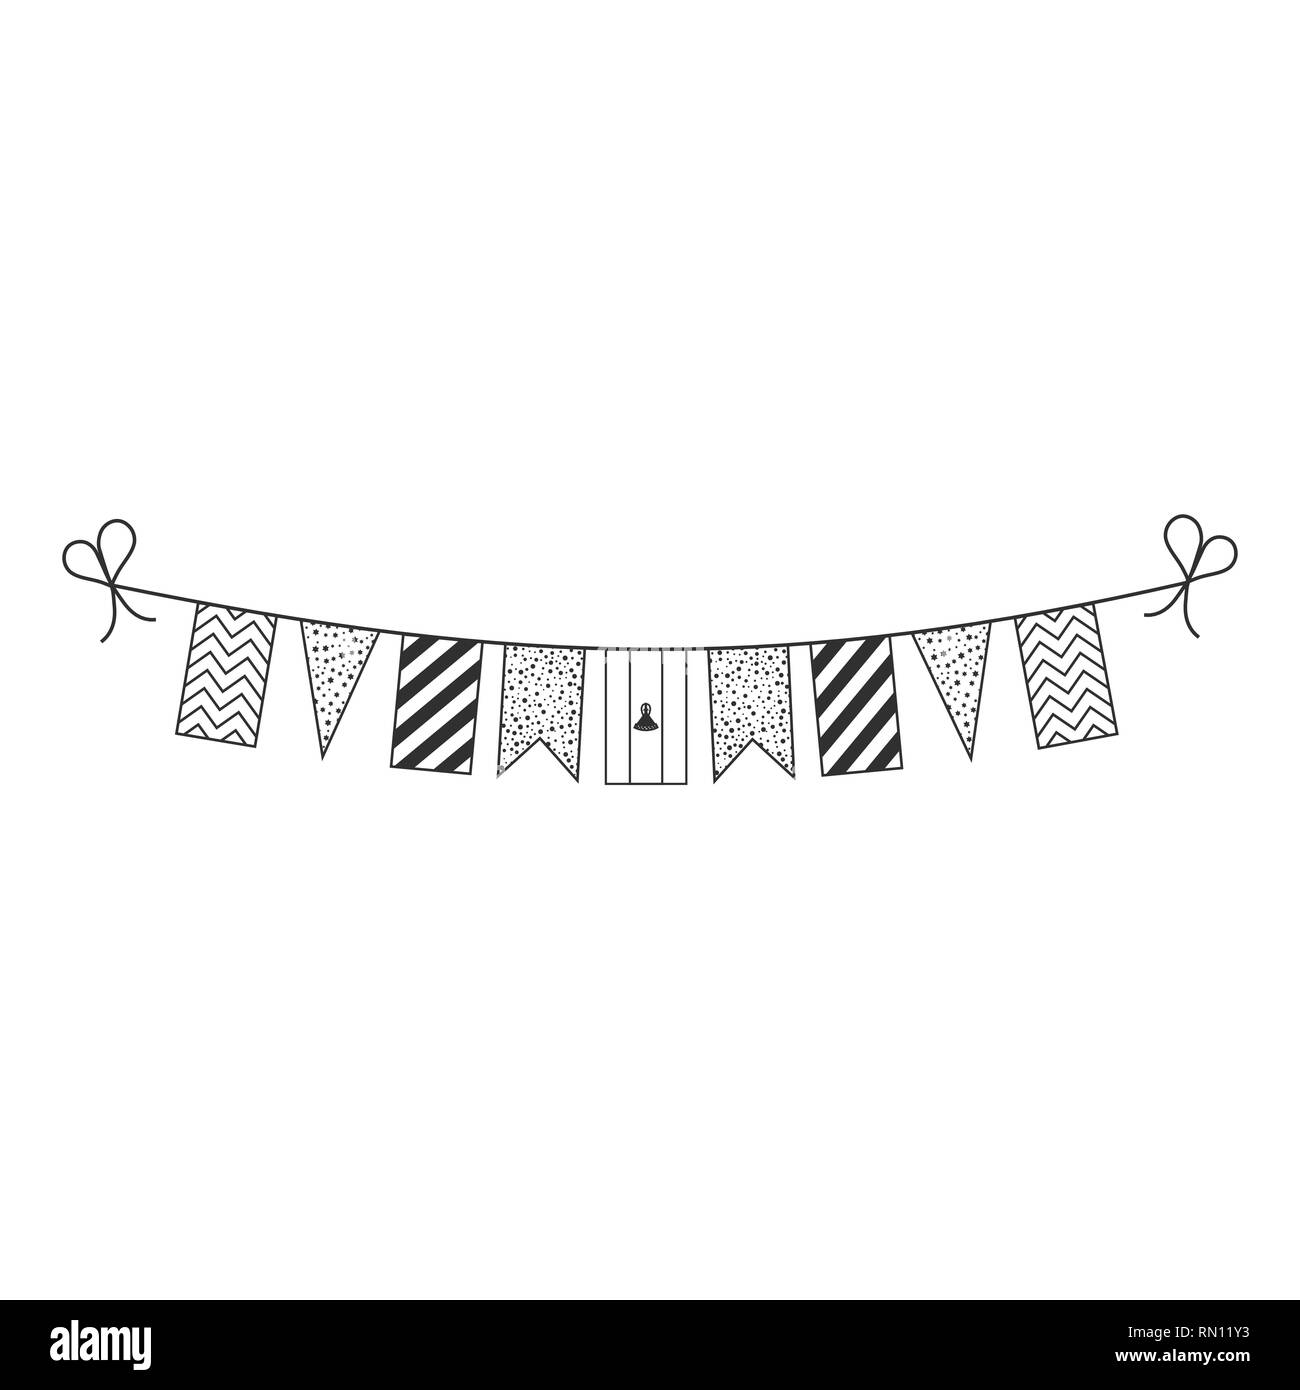 Decorations bunting flags for Lesotho national day holiday in black outline flat design. Independence day or National day holiday concept. Stock Vector